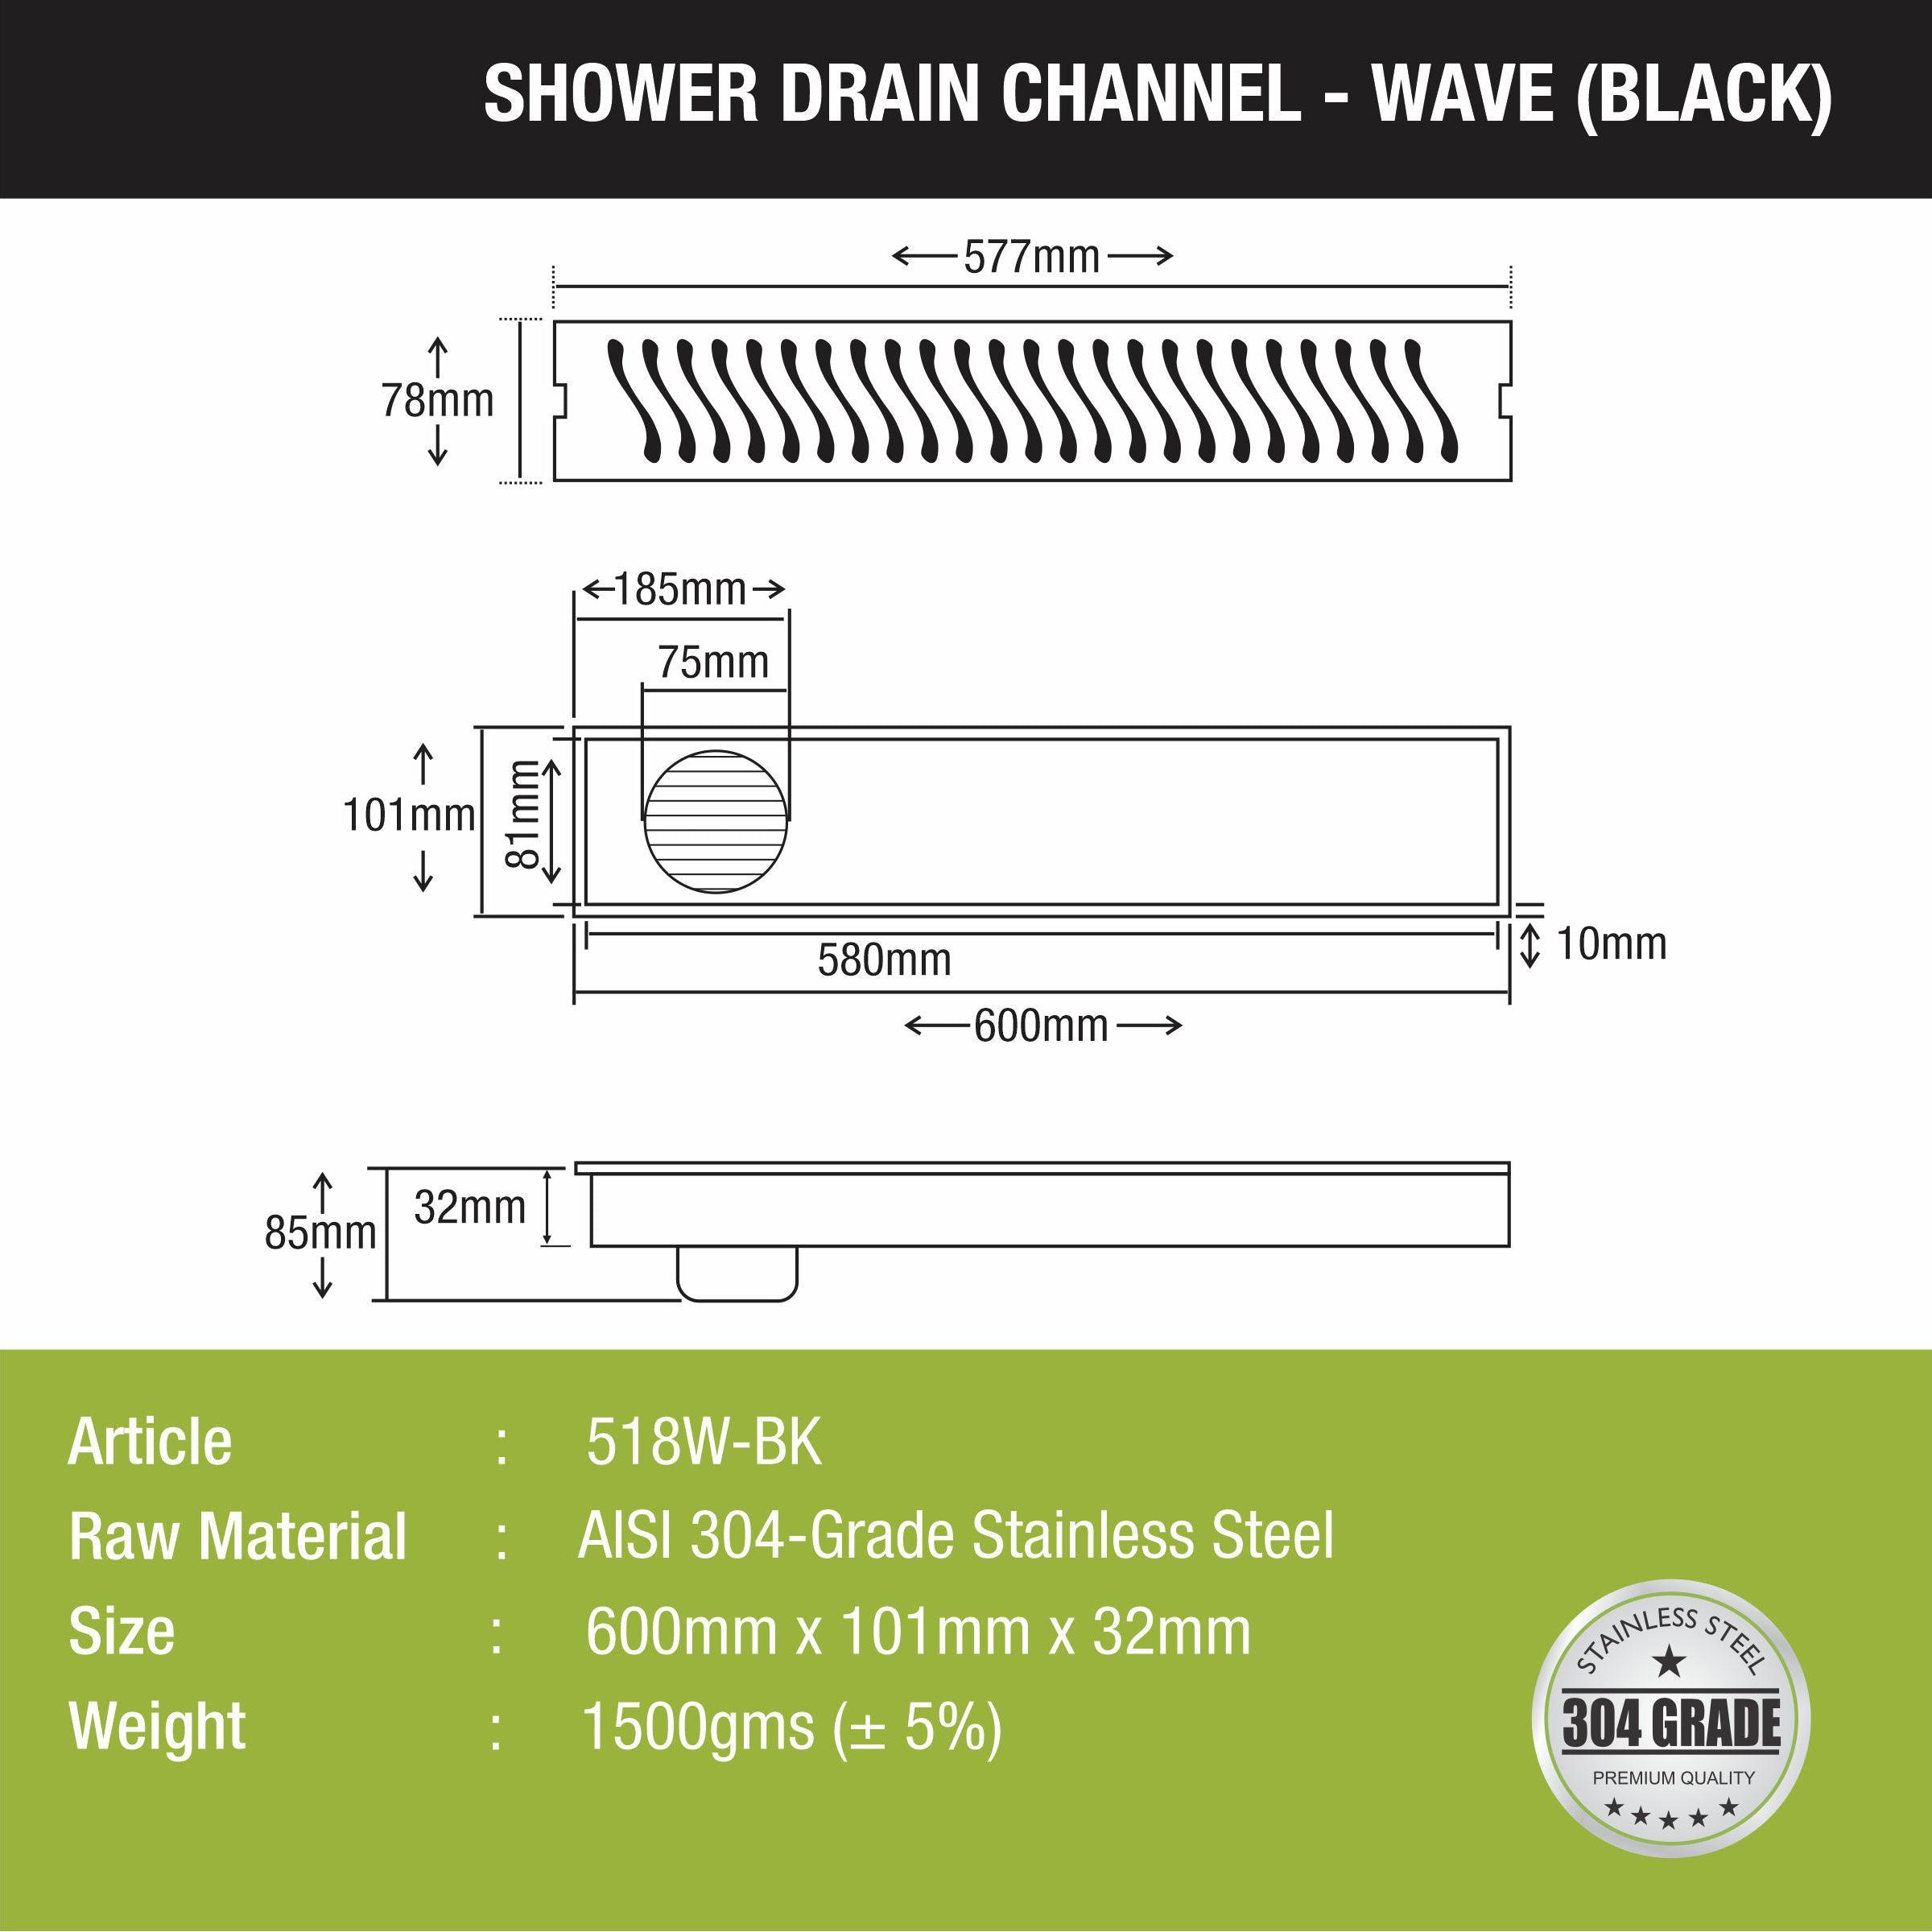 Wave Shower Drain Channel - Black (24 x 4 Inches) size and mesurement